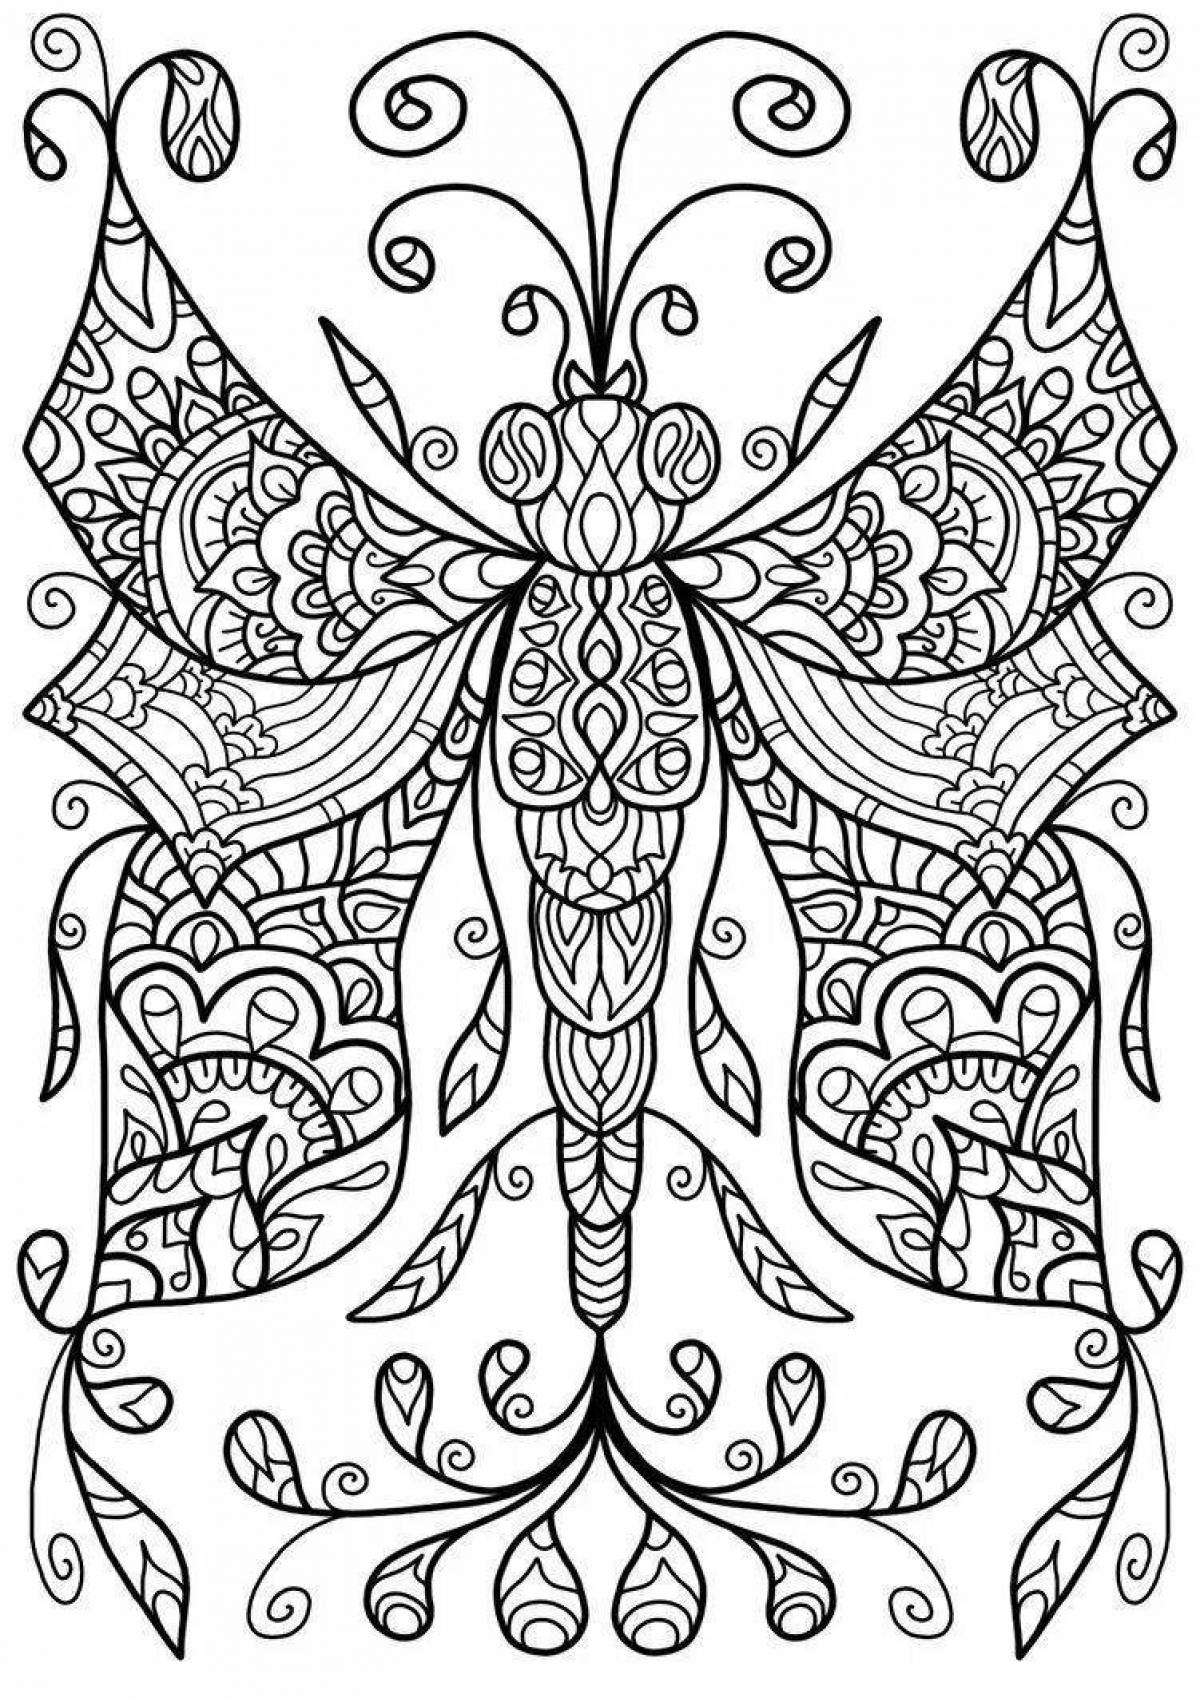 Exquisite coloring pages magical patterns